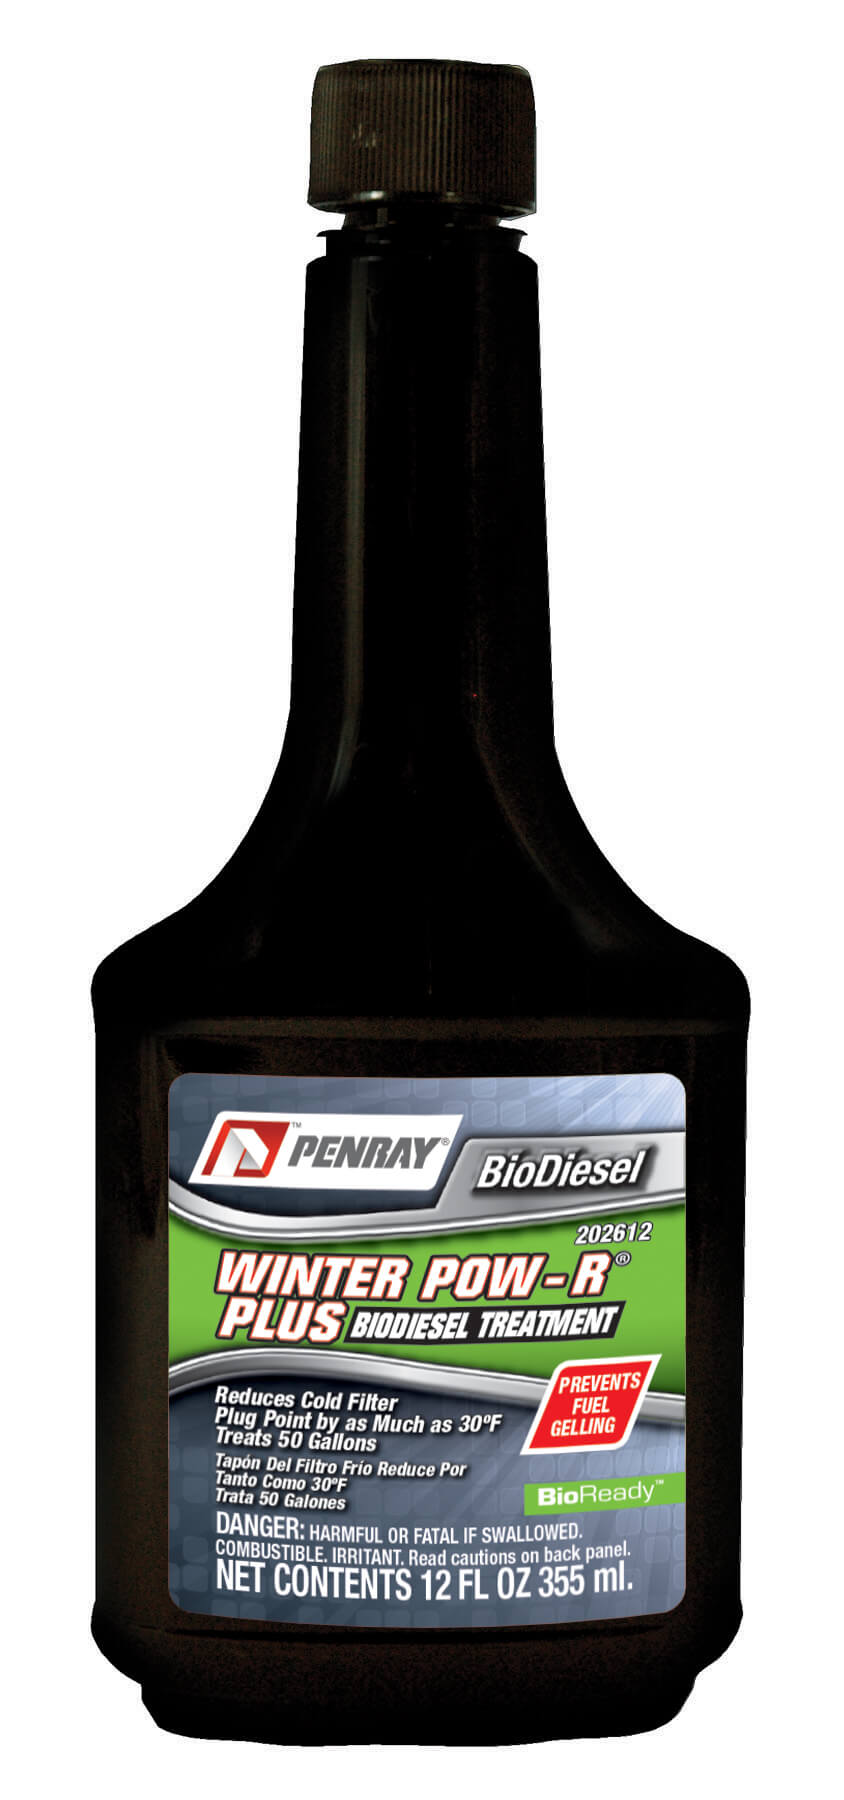 Penray, Engine cleaner & degreaser 4220